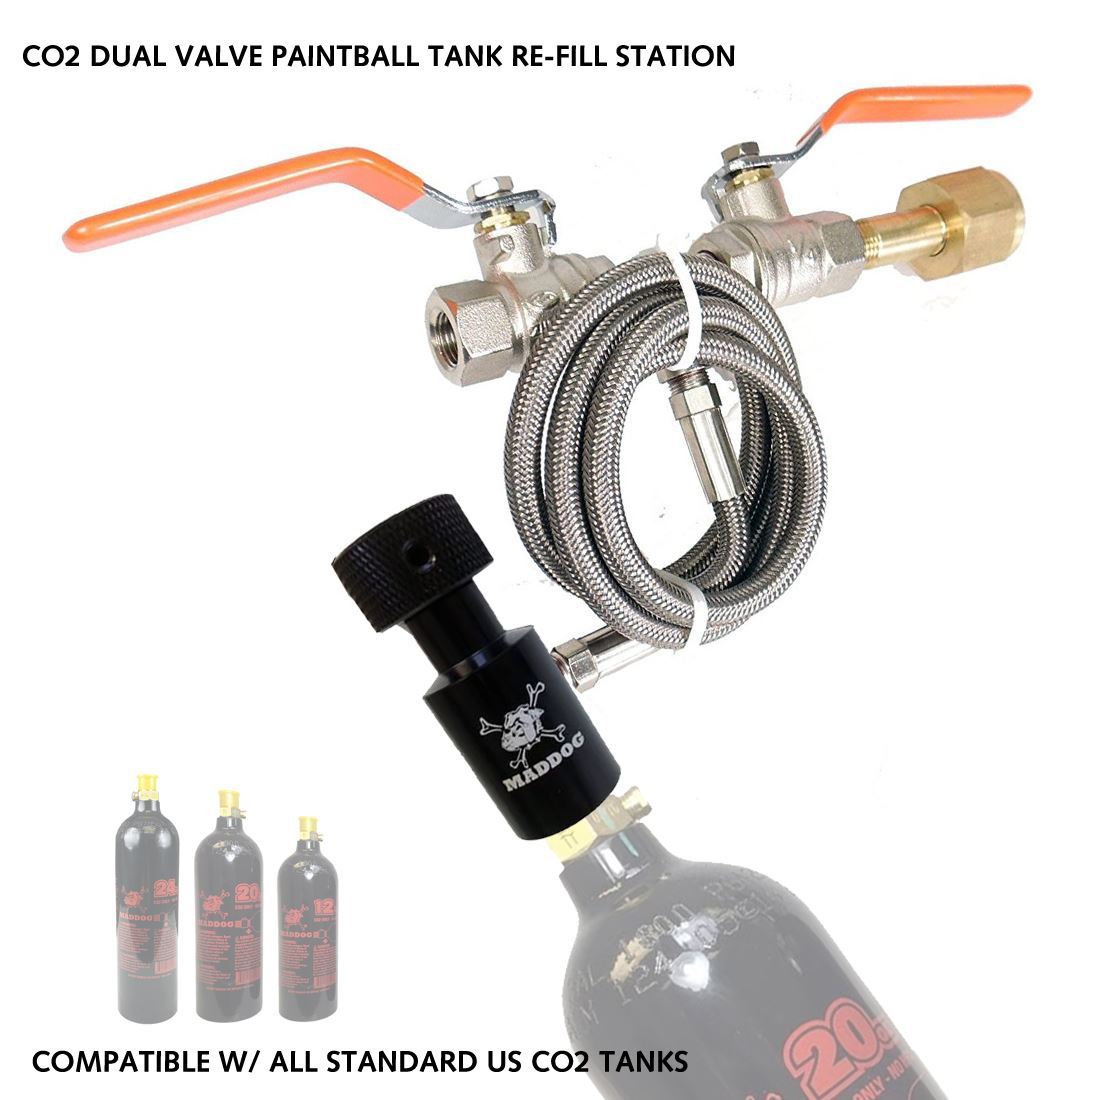 Maddog Paintball CO2 Fill Station, CO2 Dual Valve Bottle Refill Station for 12oz, 16oz, 20oz, + CO2 Tanks Maddog